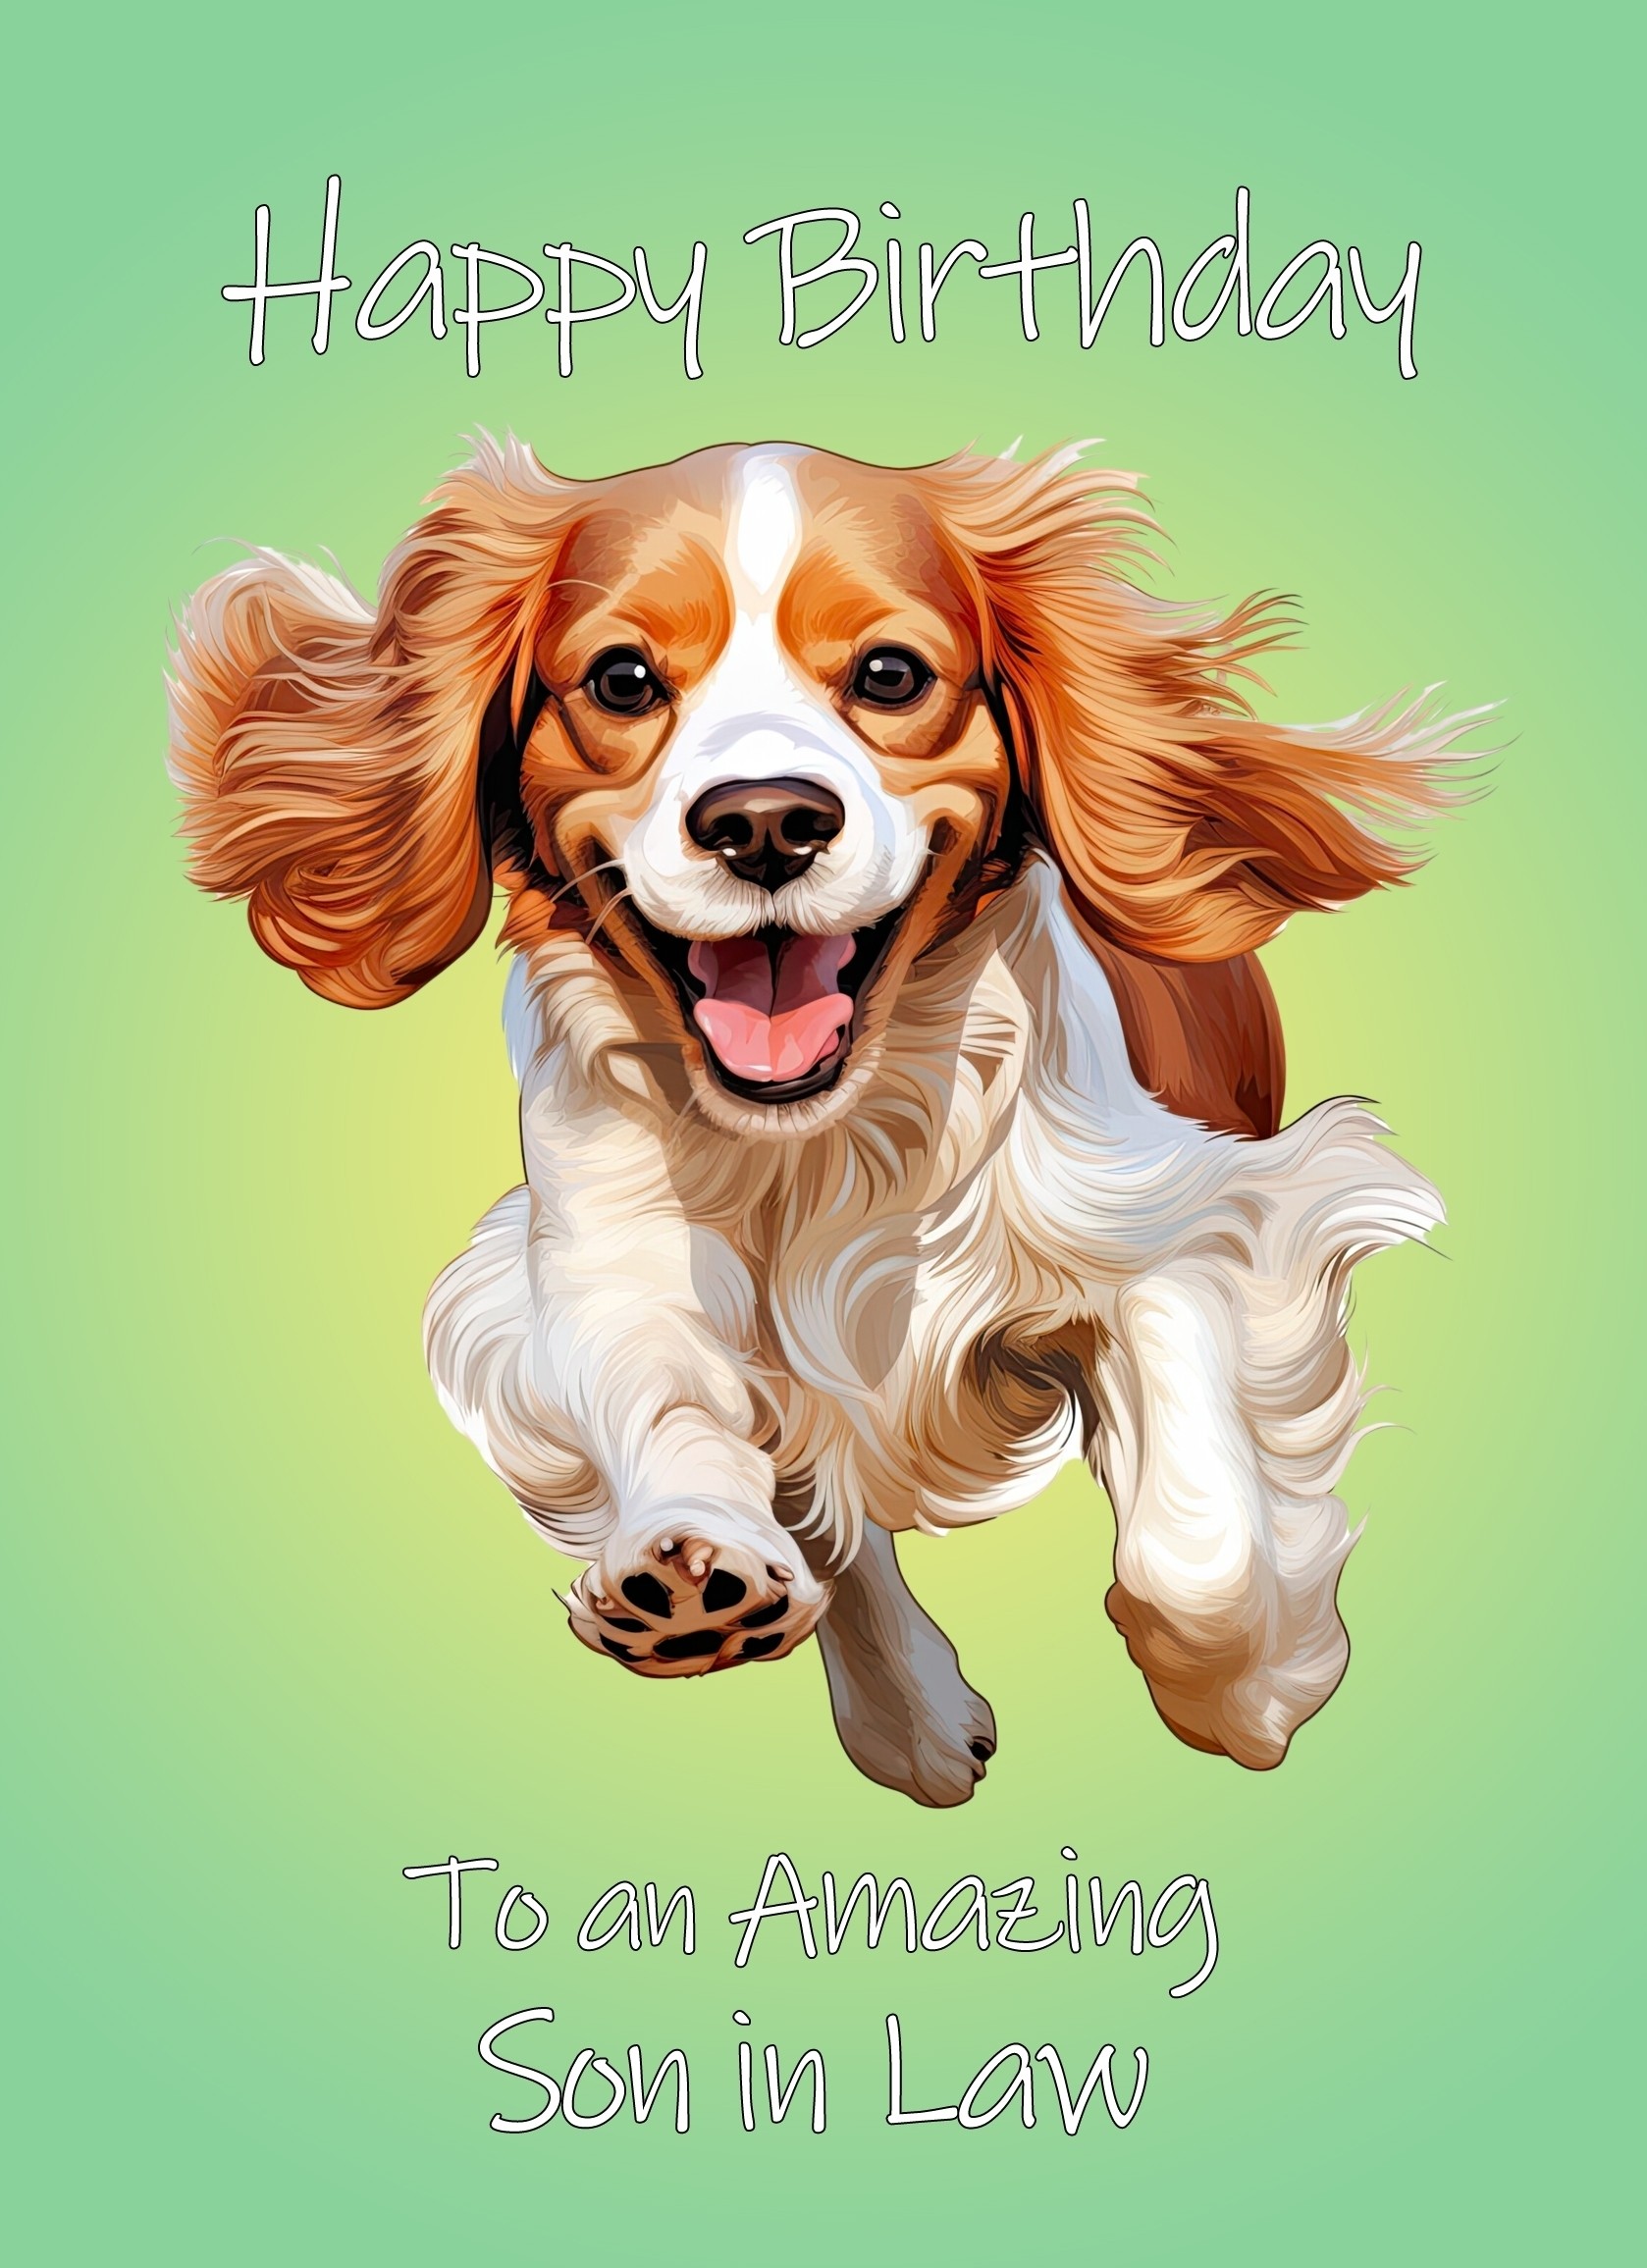 Cavalier King Charles Spaniel Dog Birthday Card For Son in Law